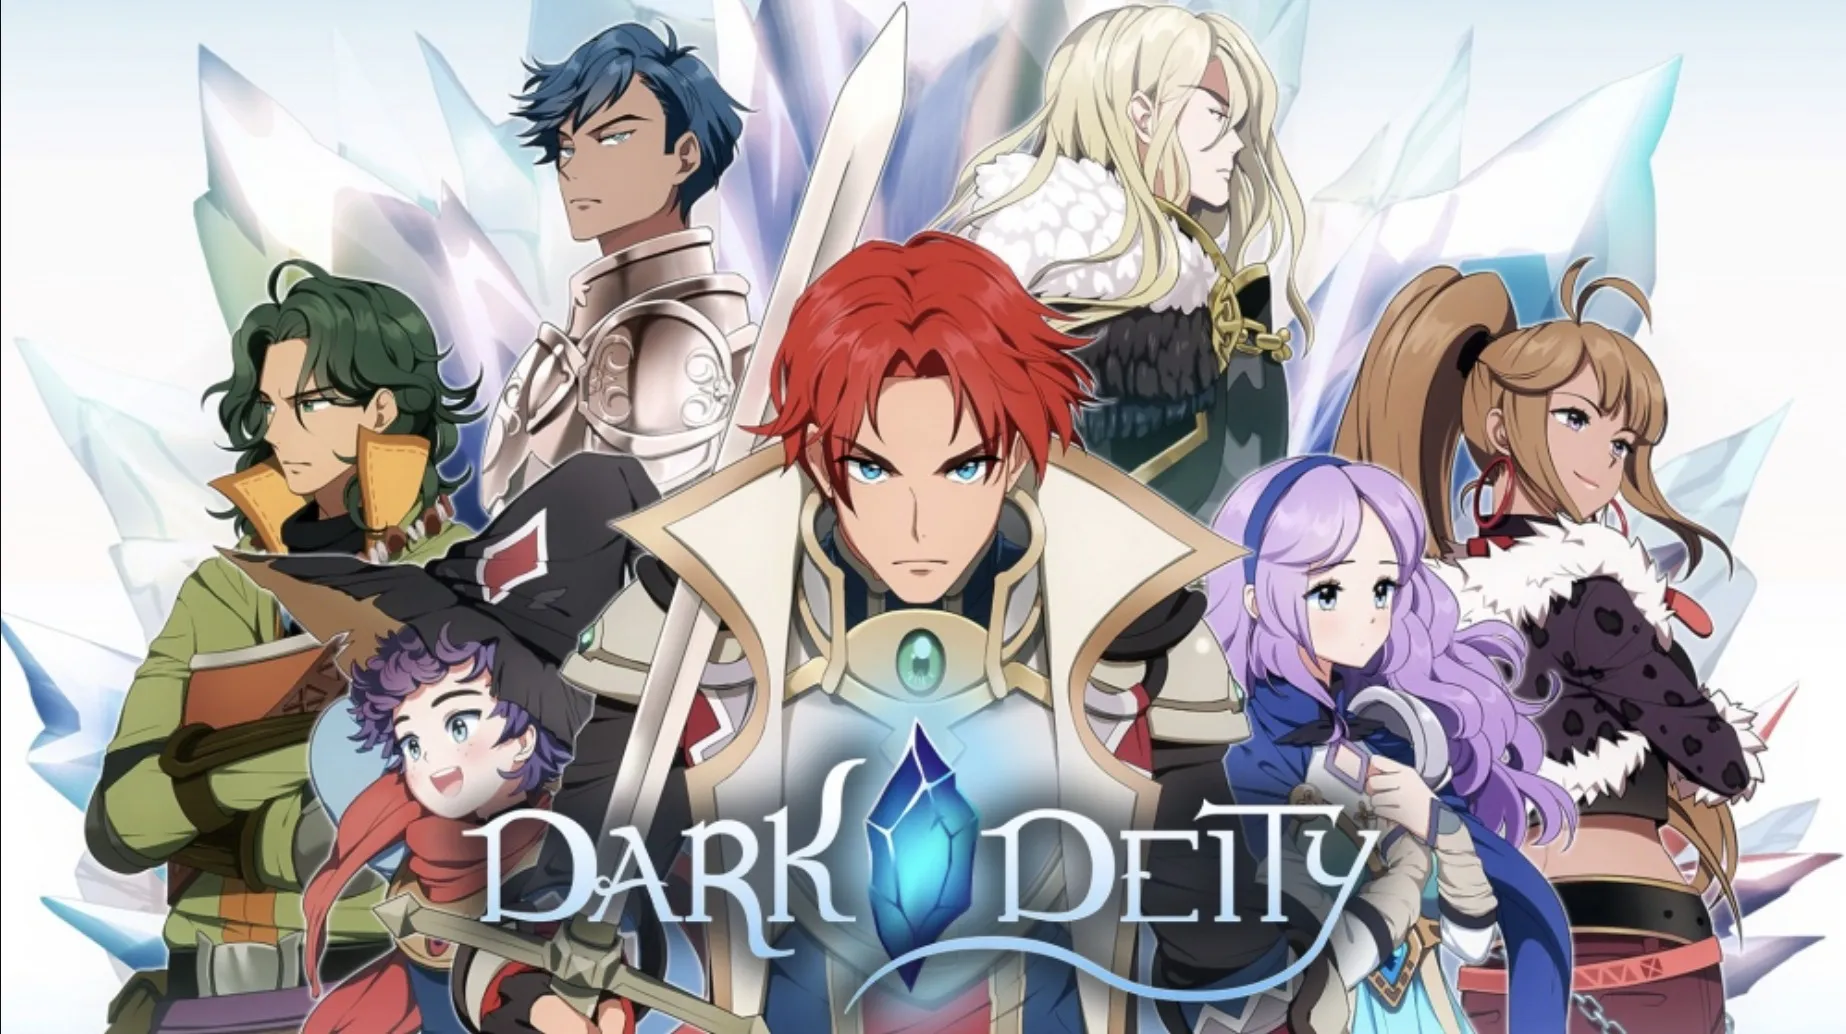 Dark Deity is a Great 'Classic' Fire Emblem-like for the Switch